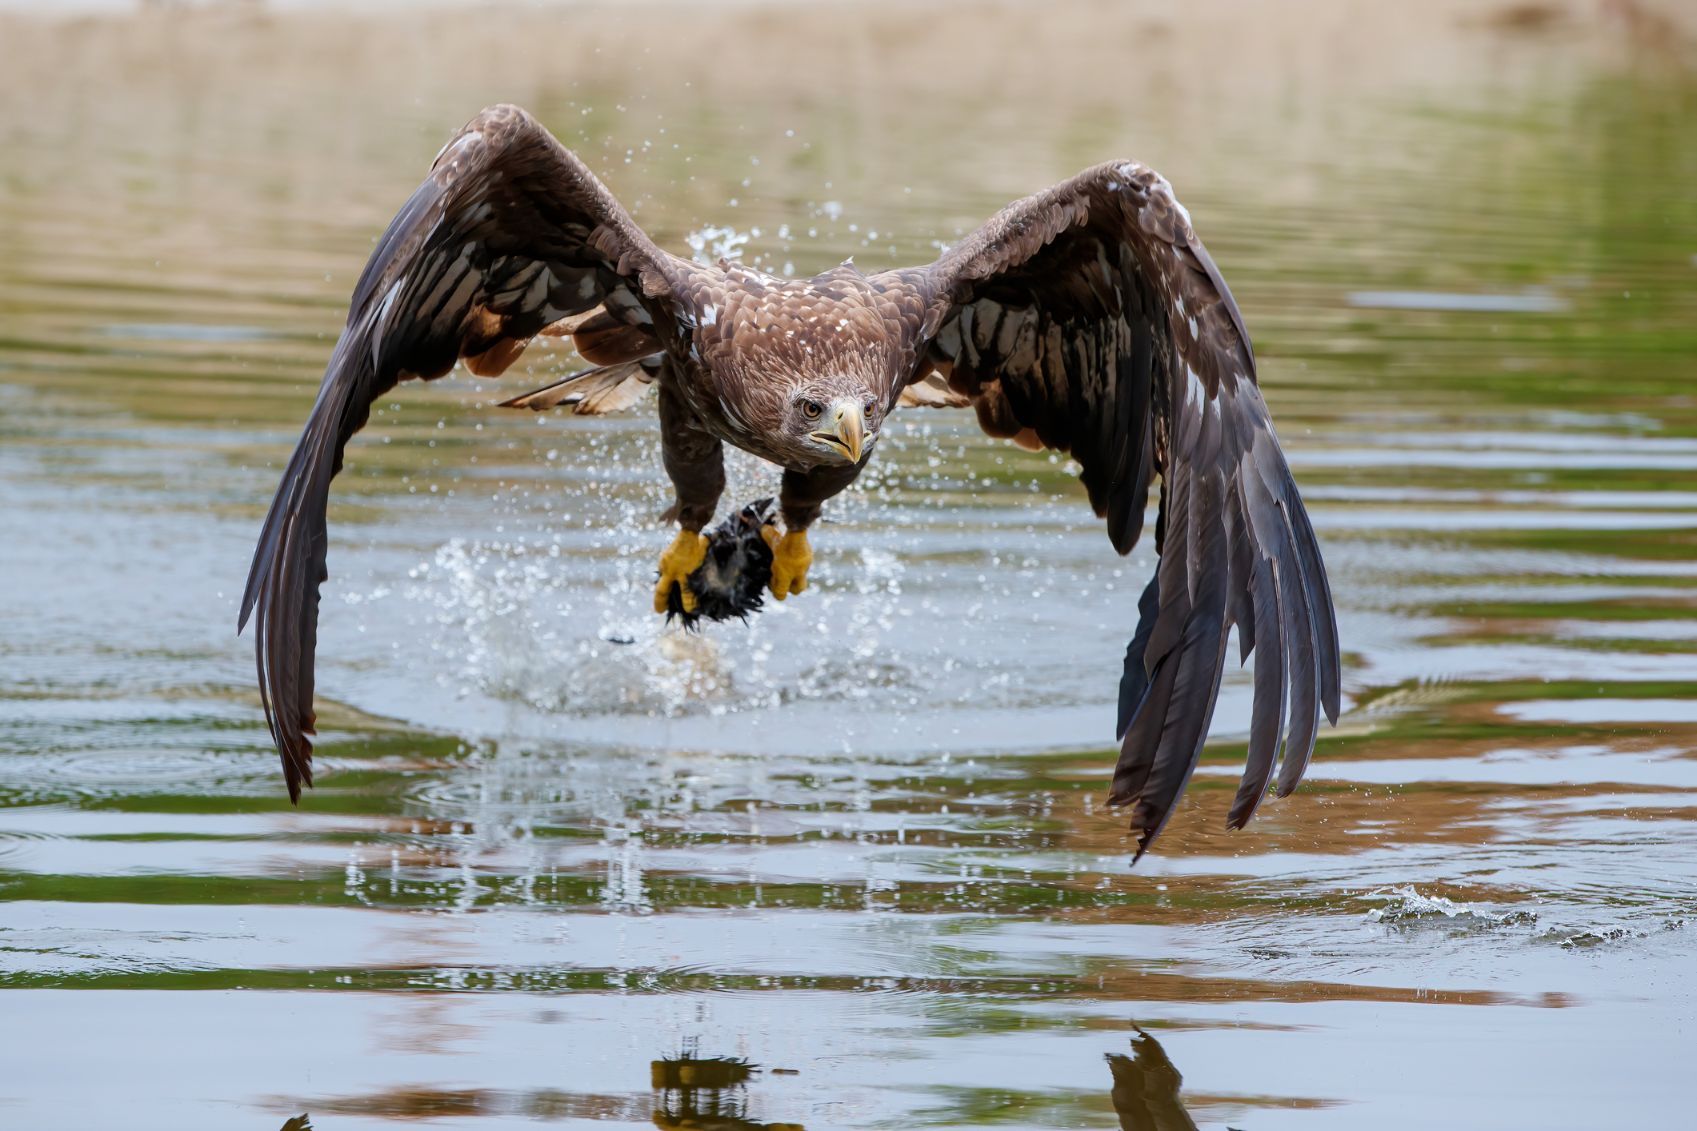 A white-tailed eagle swoops down to catch a fish in the water.